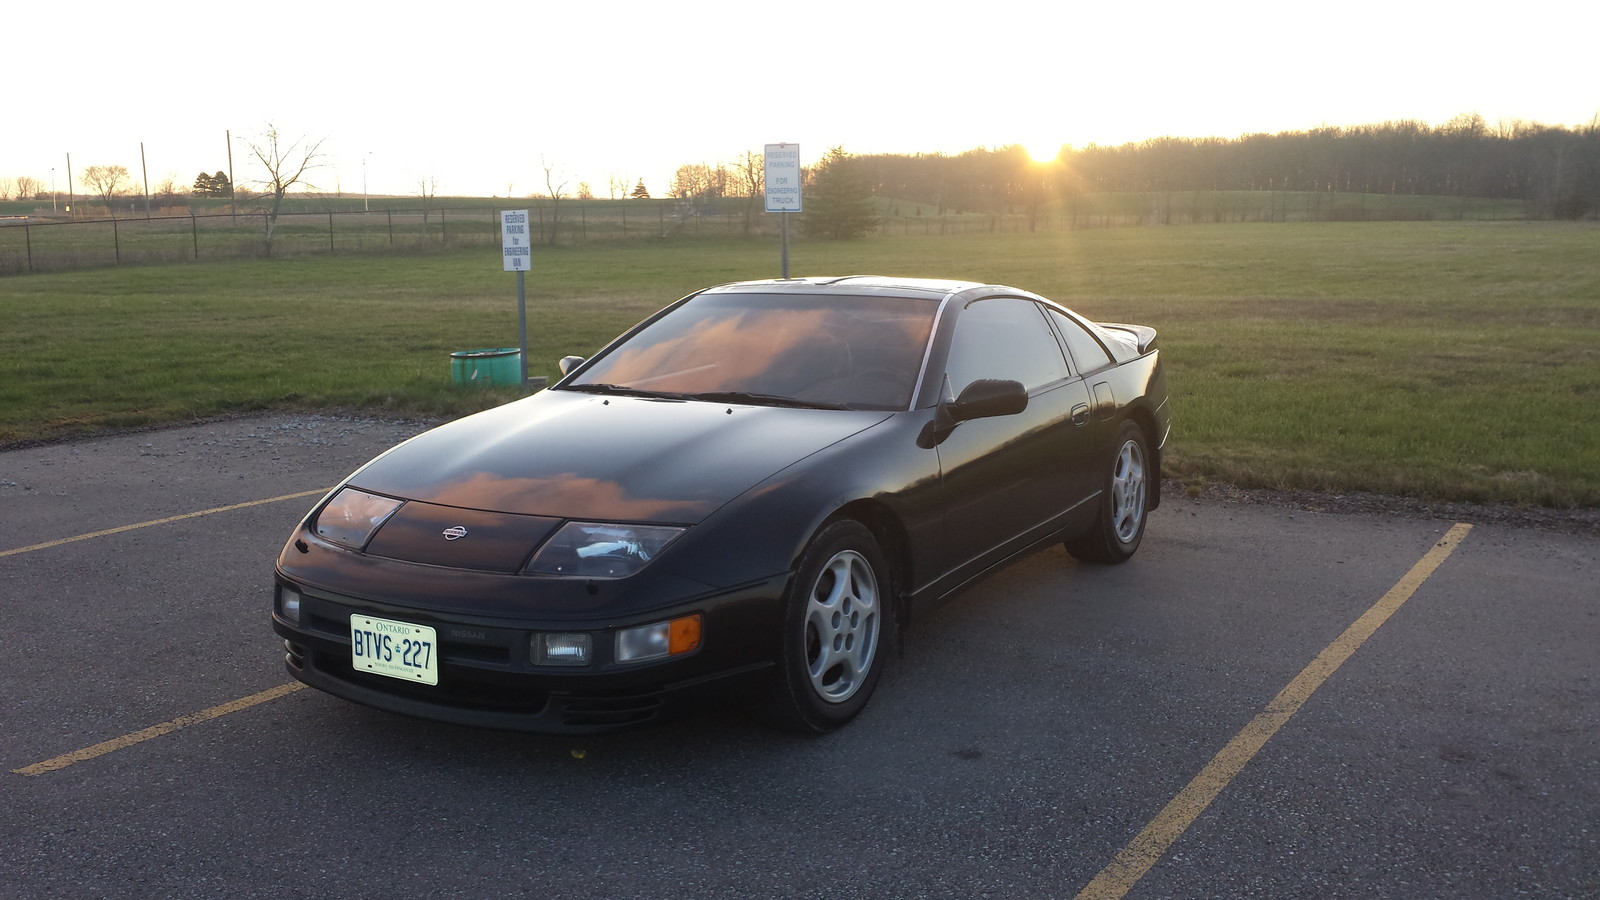 Nissan 300zx 1/4 mile time #1